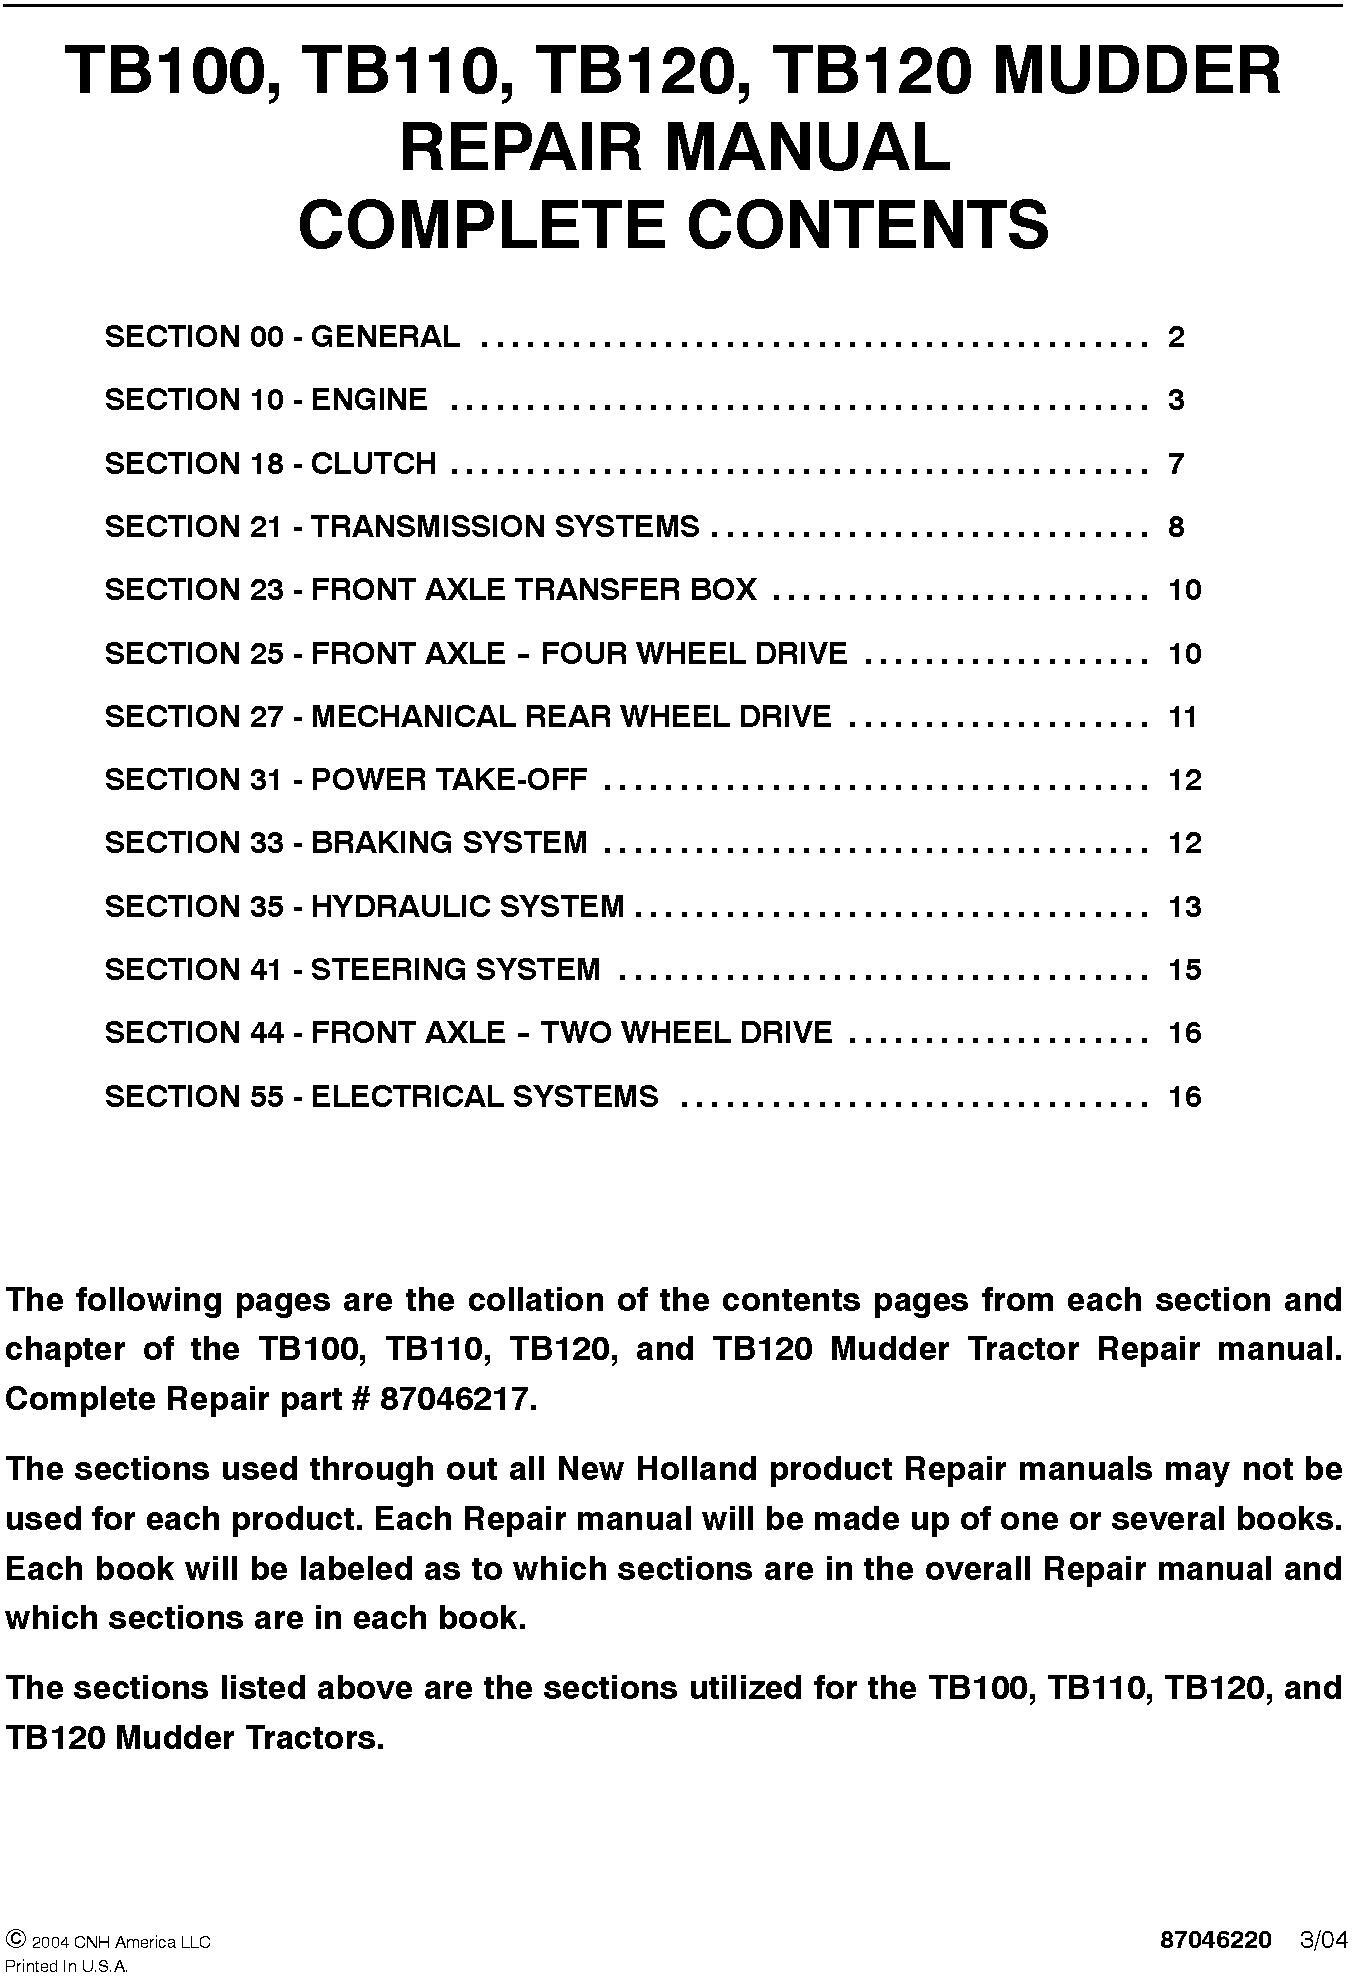 New Holland TB100, TB110, TB120, TB120 Mudder Tractor Complete Service Manual - 19605